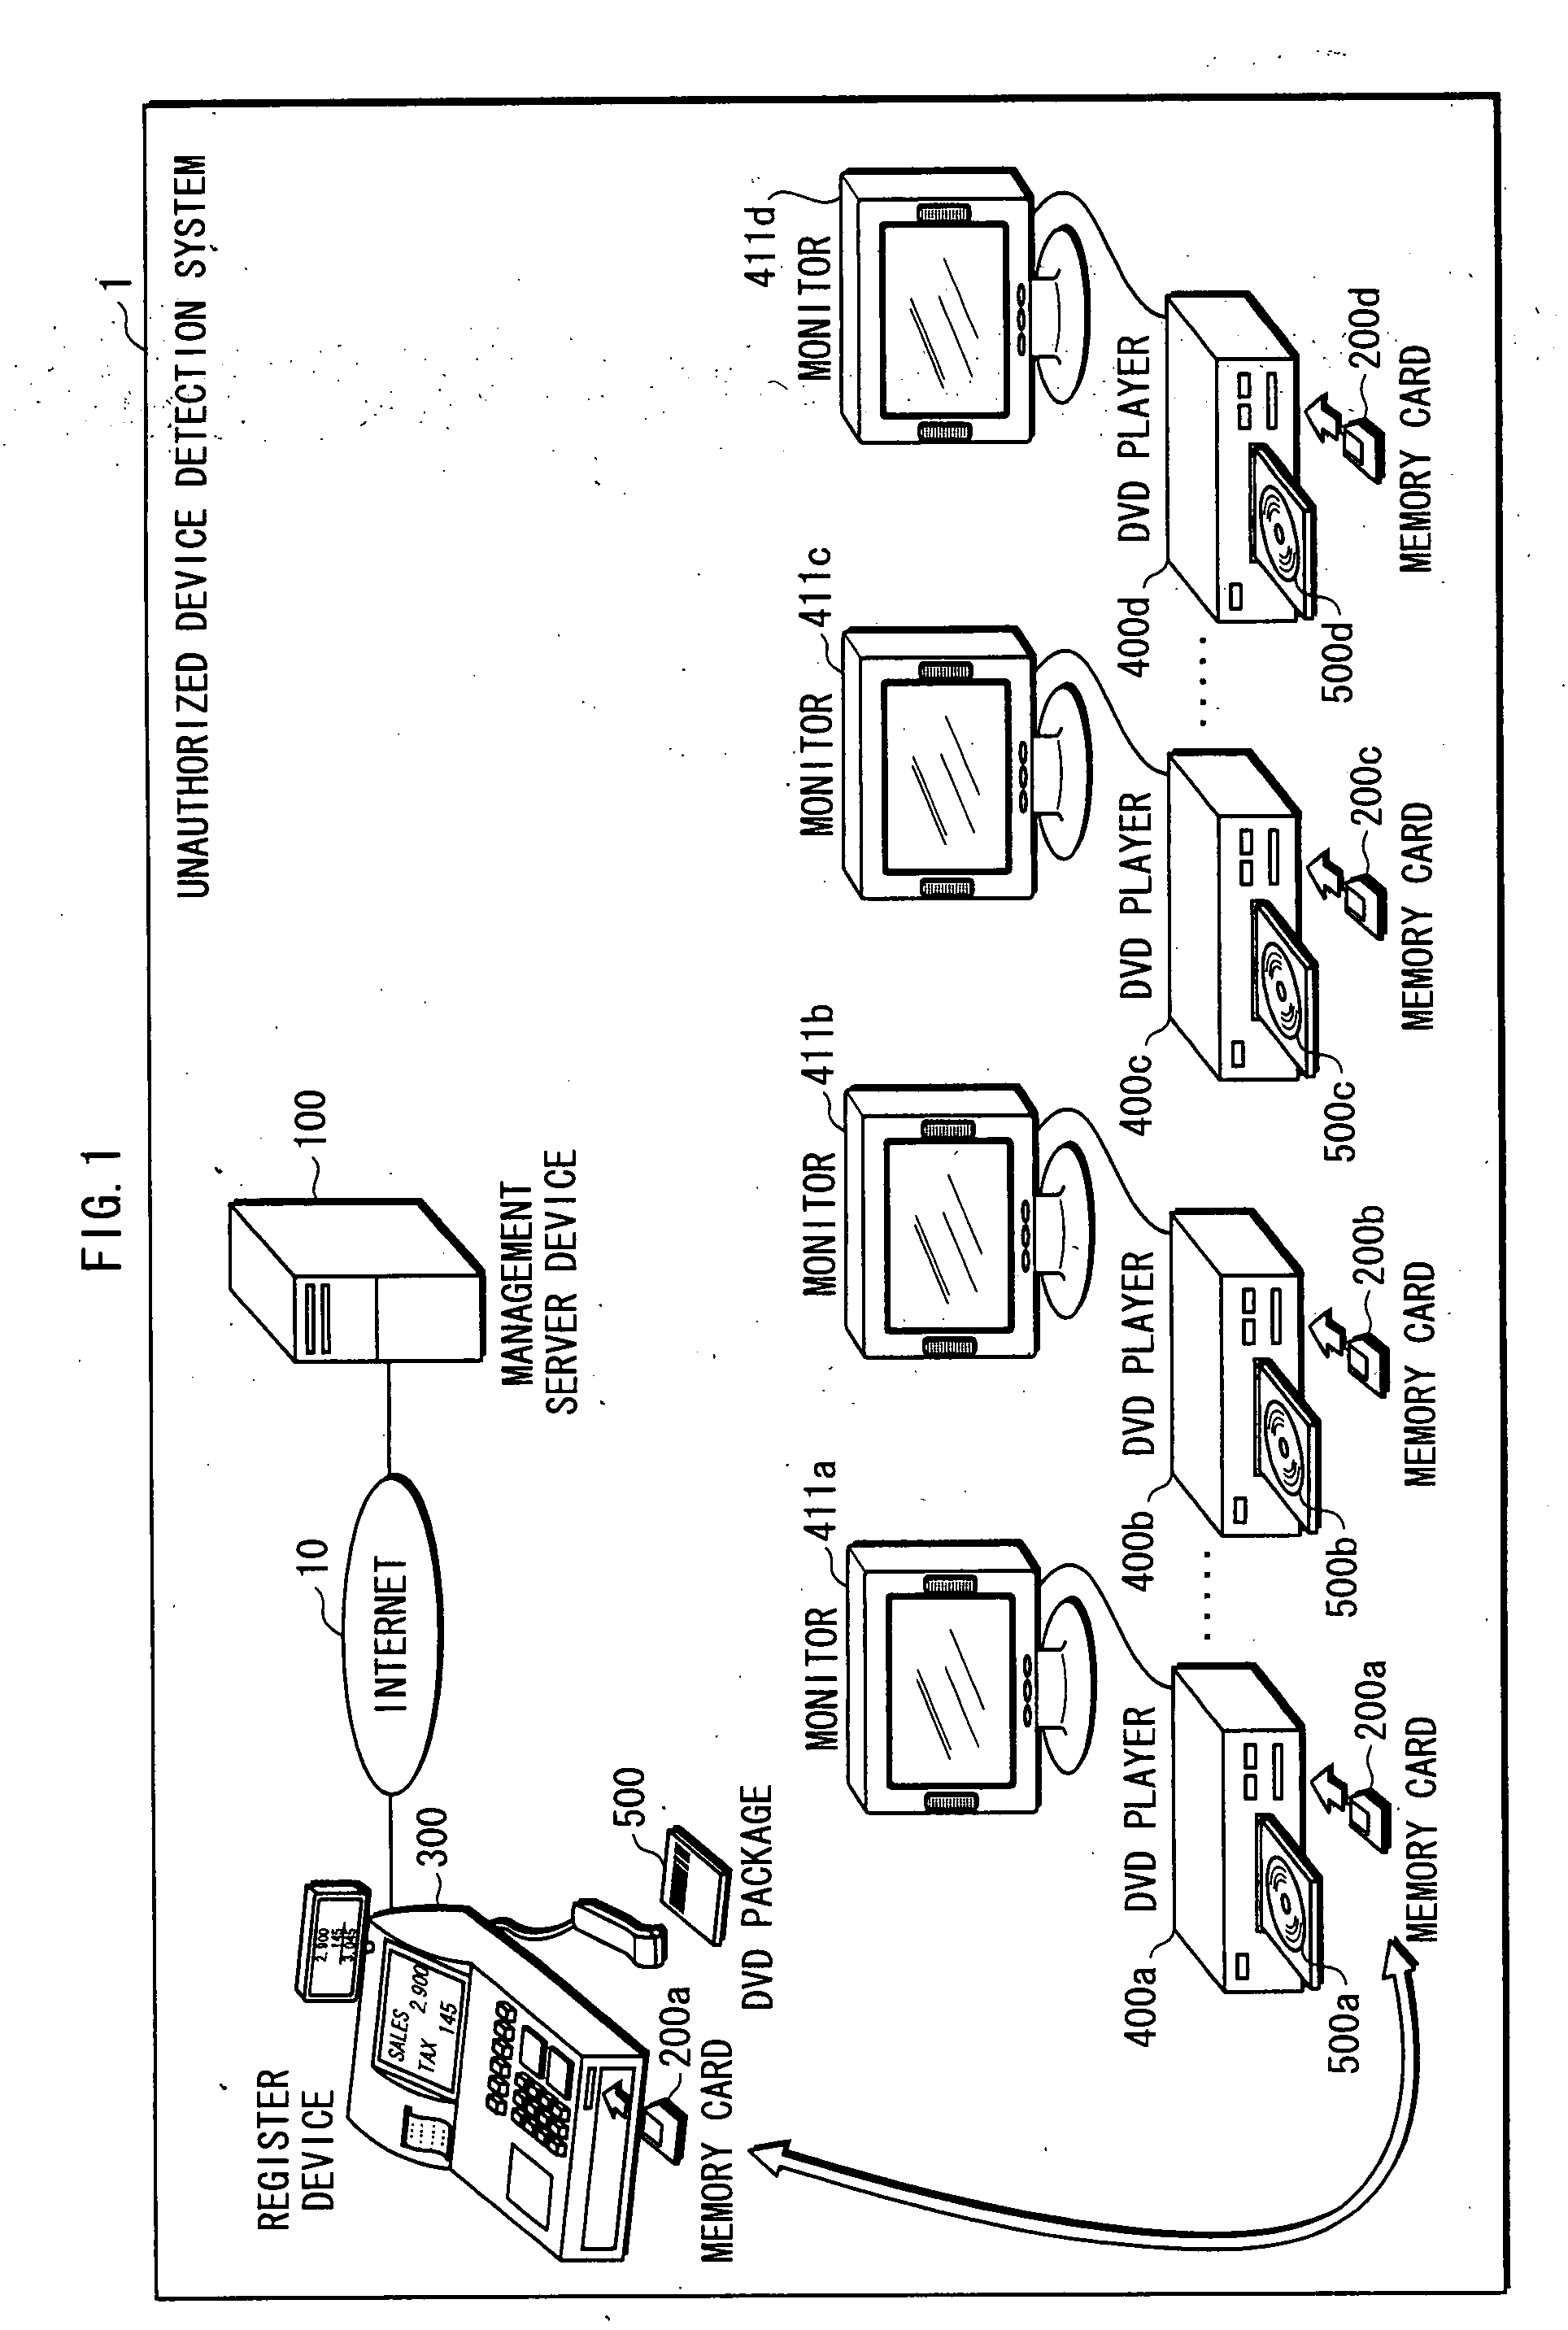 Unauthorized Device Detection Device And Unauthorized Device Detection System